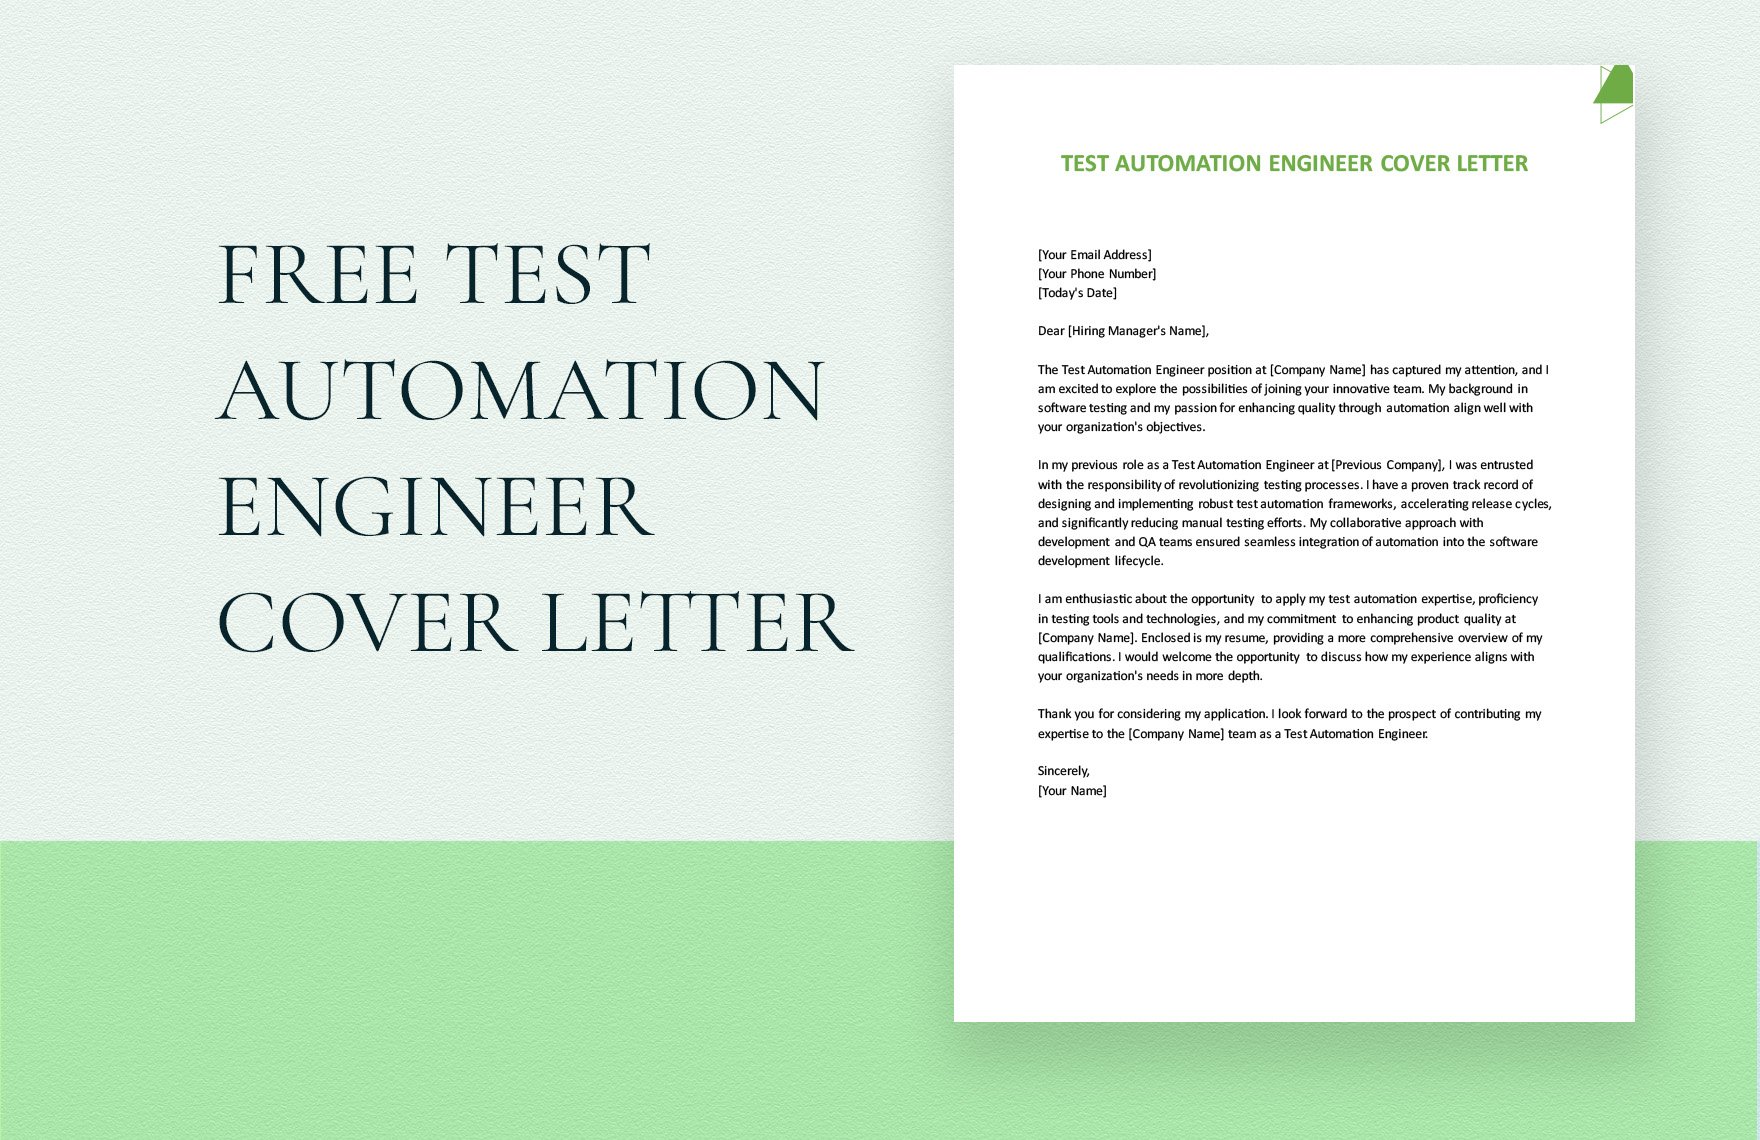 Test Automation Engineer Cover Letter